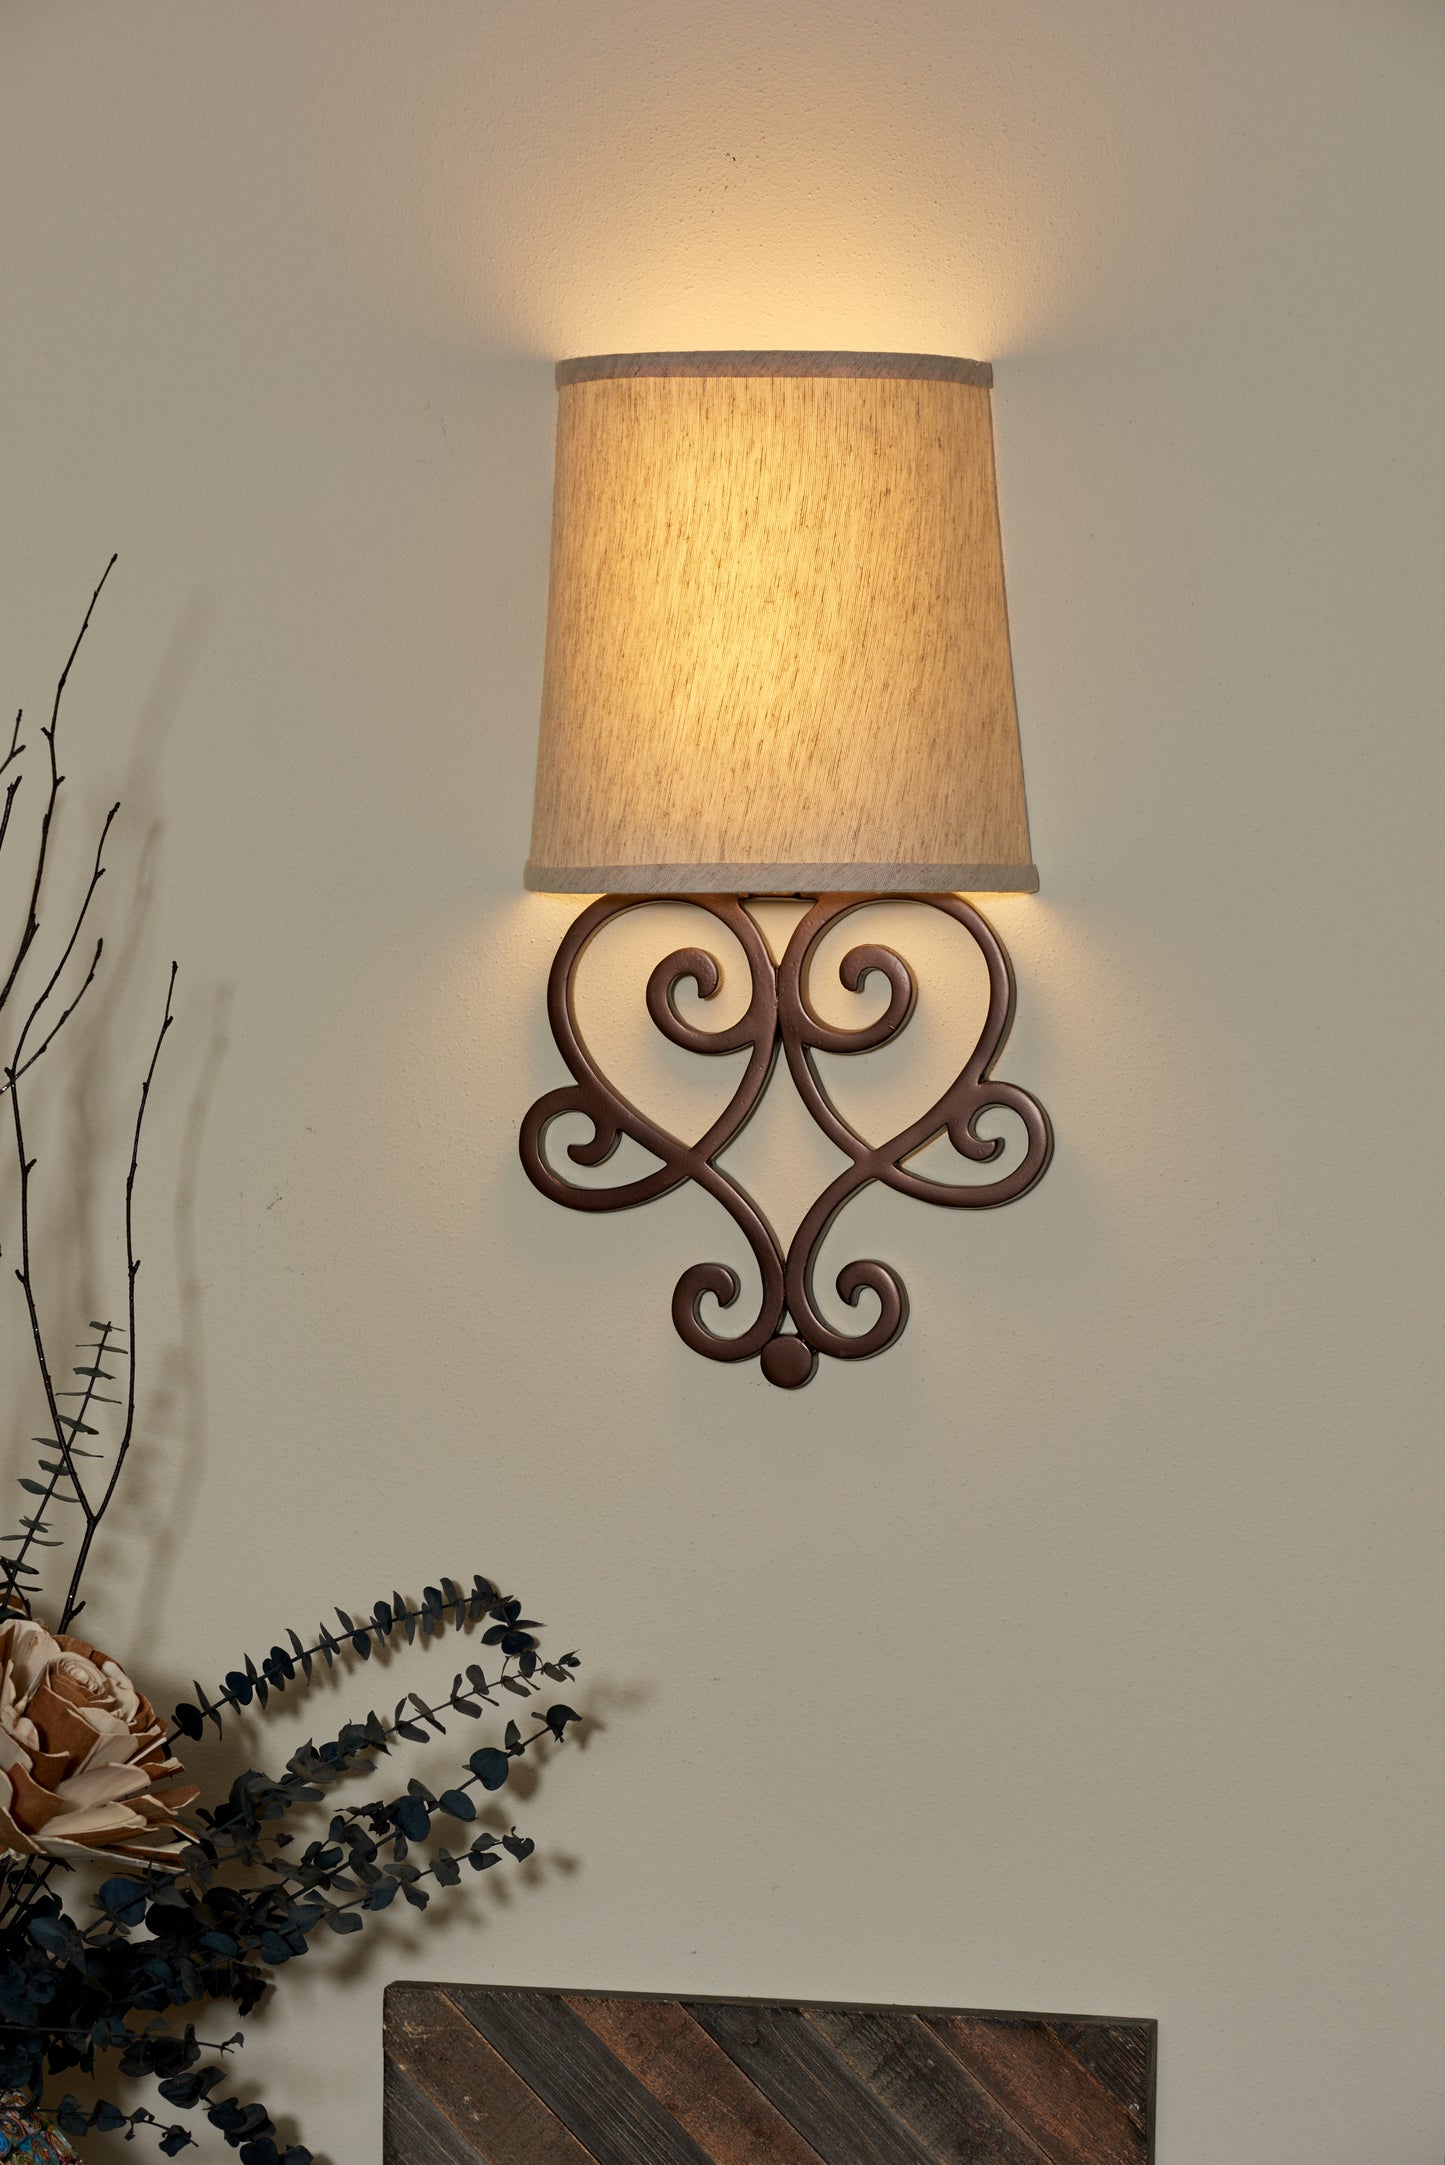 Helix Heart Scroll Wall Art Sconce with Tan Fleck Shade and Bronze Base